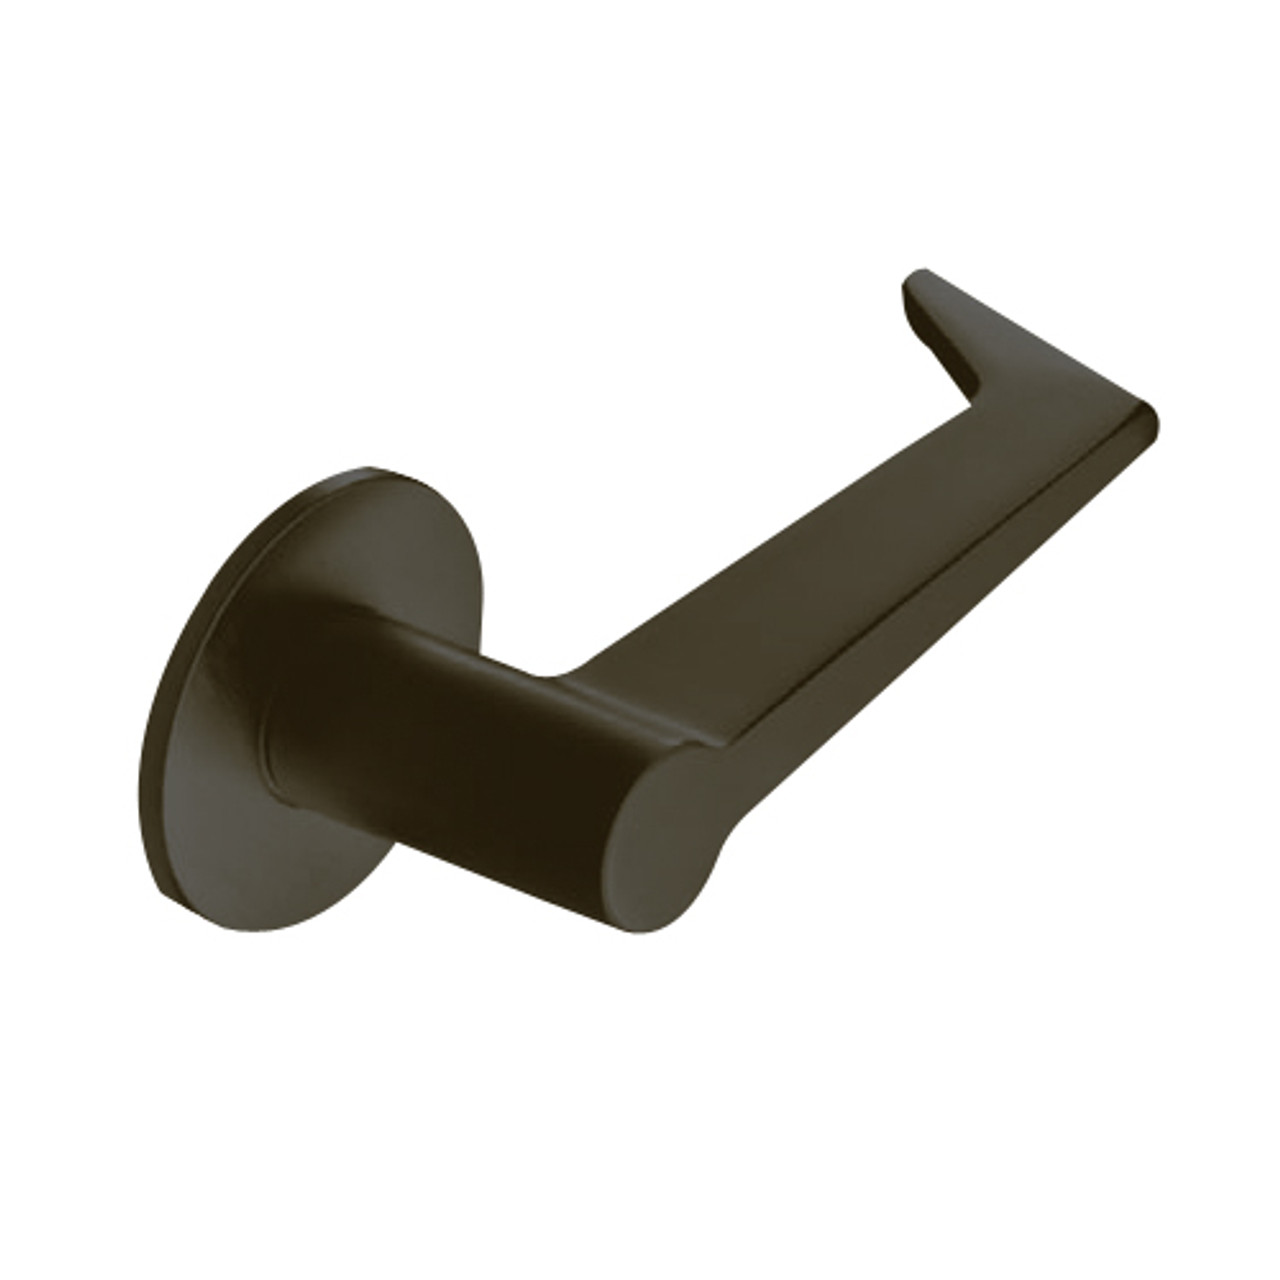 ML2058-ESF-613 Corbin Russwin ML2000 Series Mortise Entrance Holdback Locksets with Essex Lever in Oil Rubbed Bronze